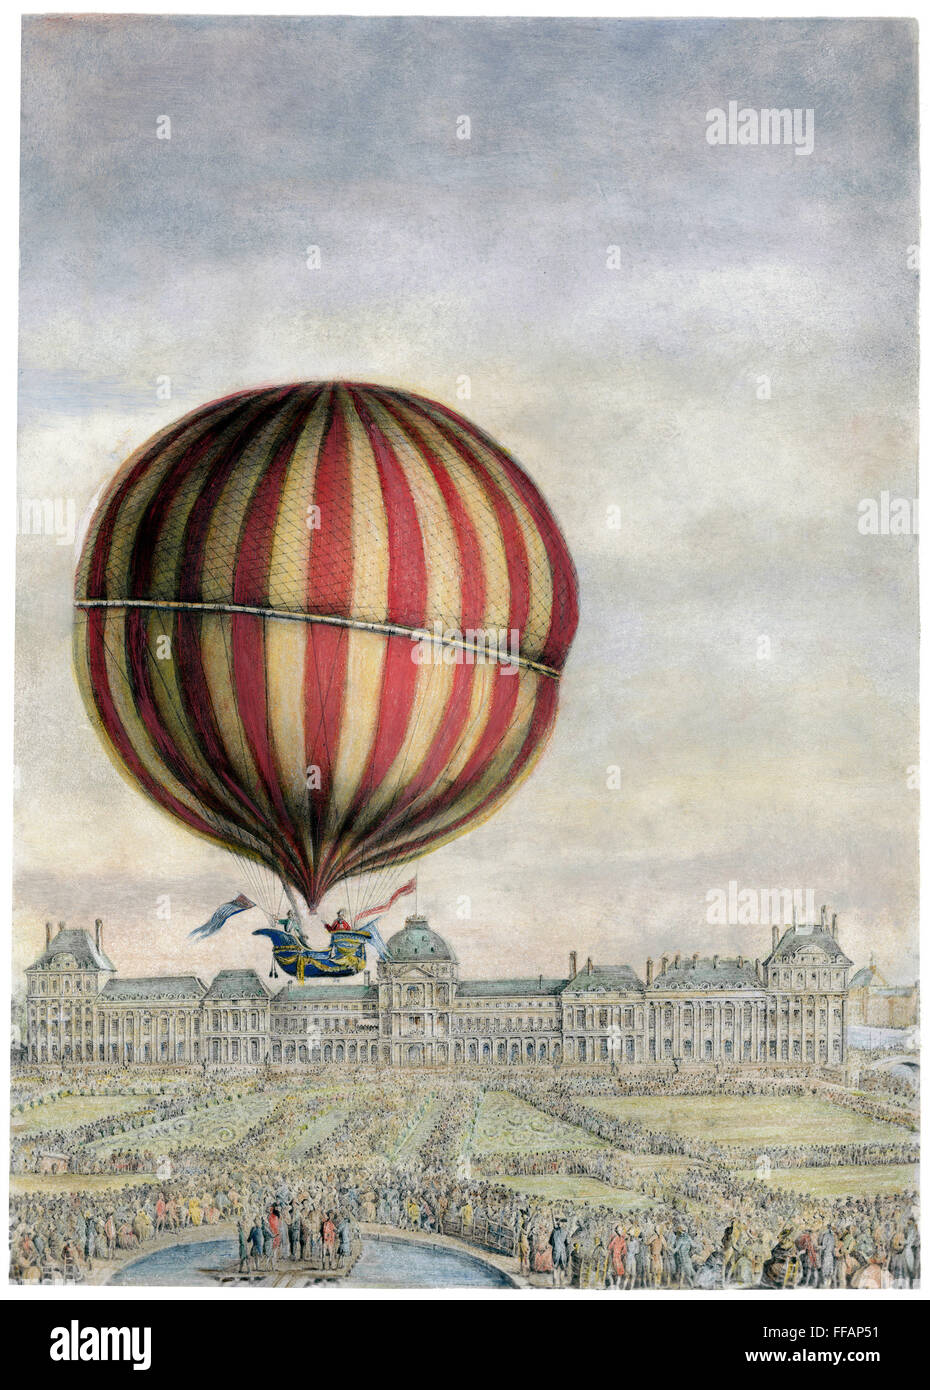 HYDROGEN BALLOON, 1783. /nDeparture of Charles and Robert's hydrogen ...